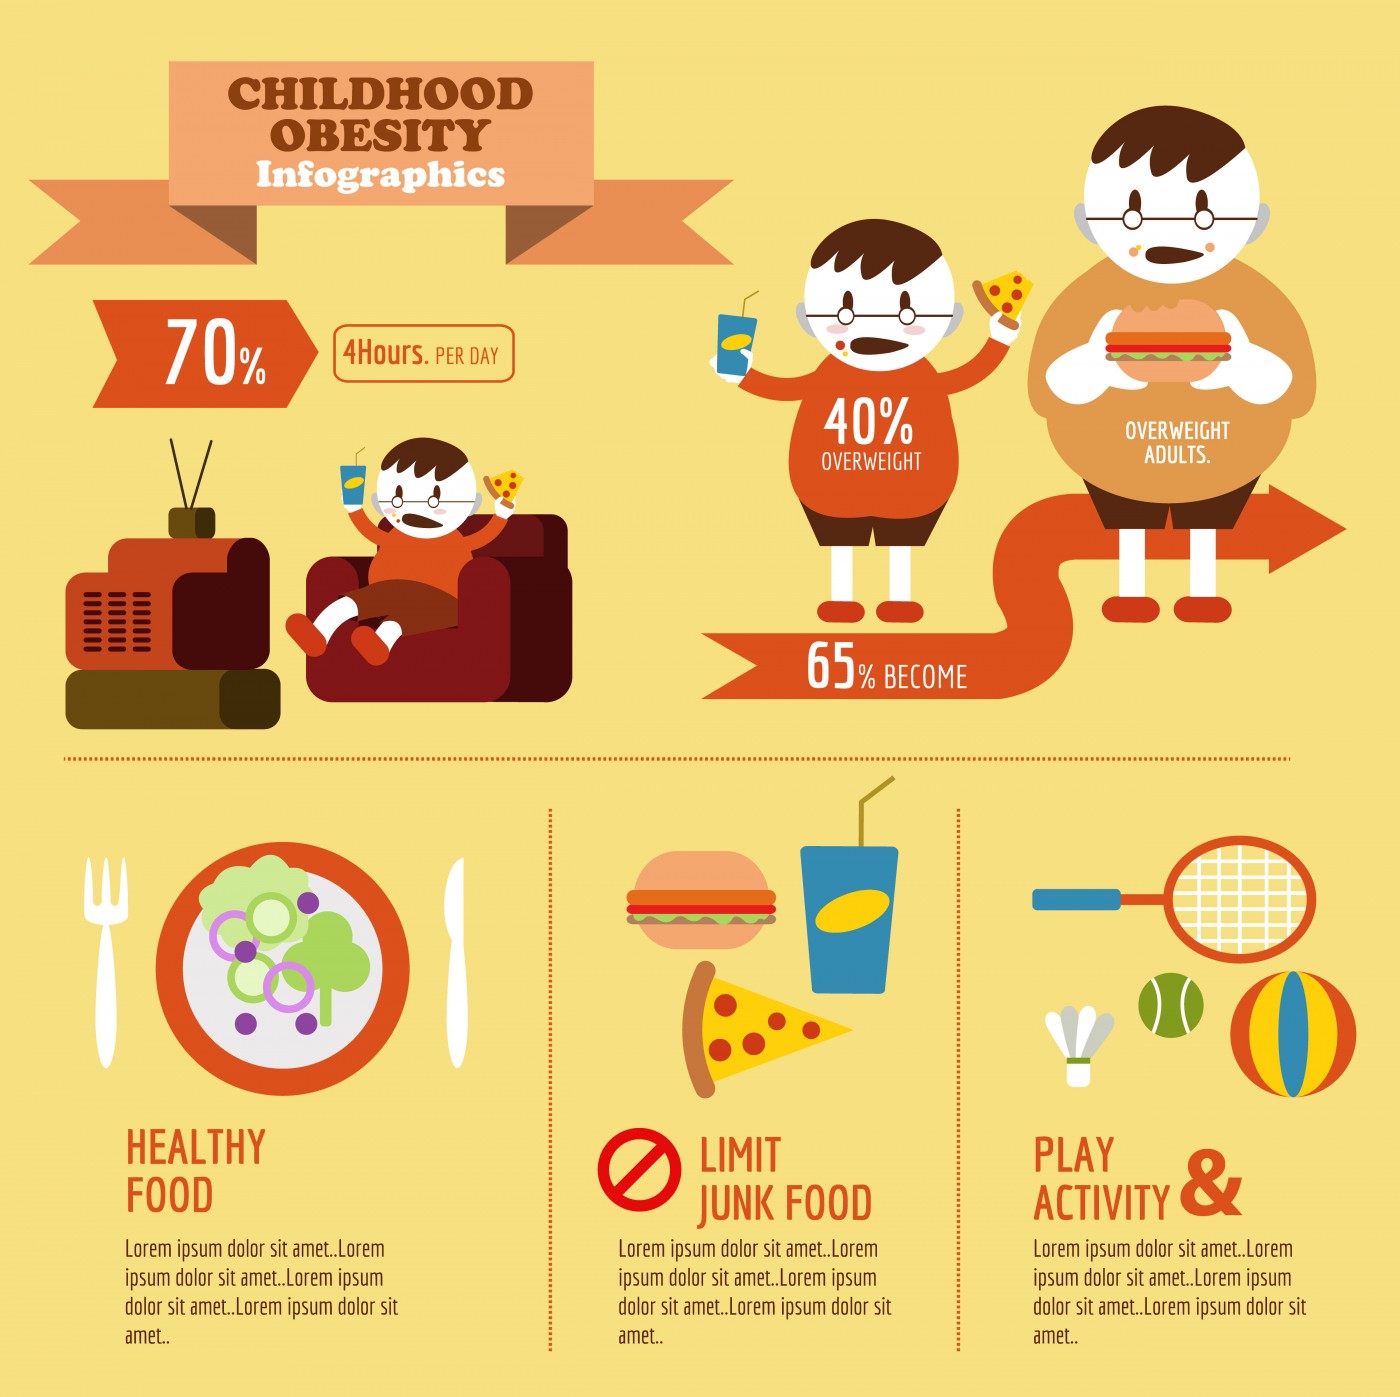 New Study Focuses on Children’s Obesity Hallmarks and Proposes New Anti-Obesity Strategies